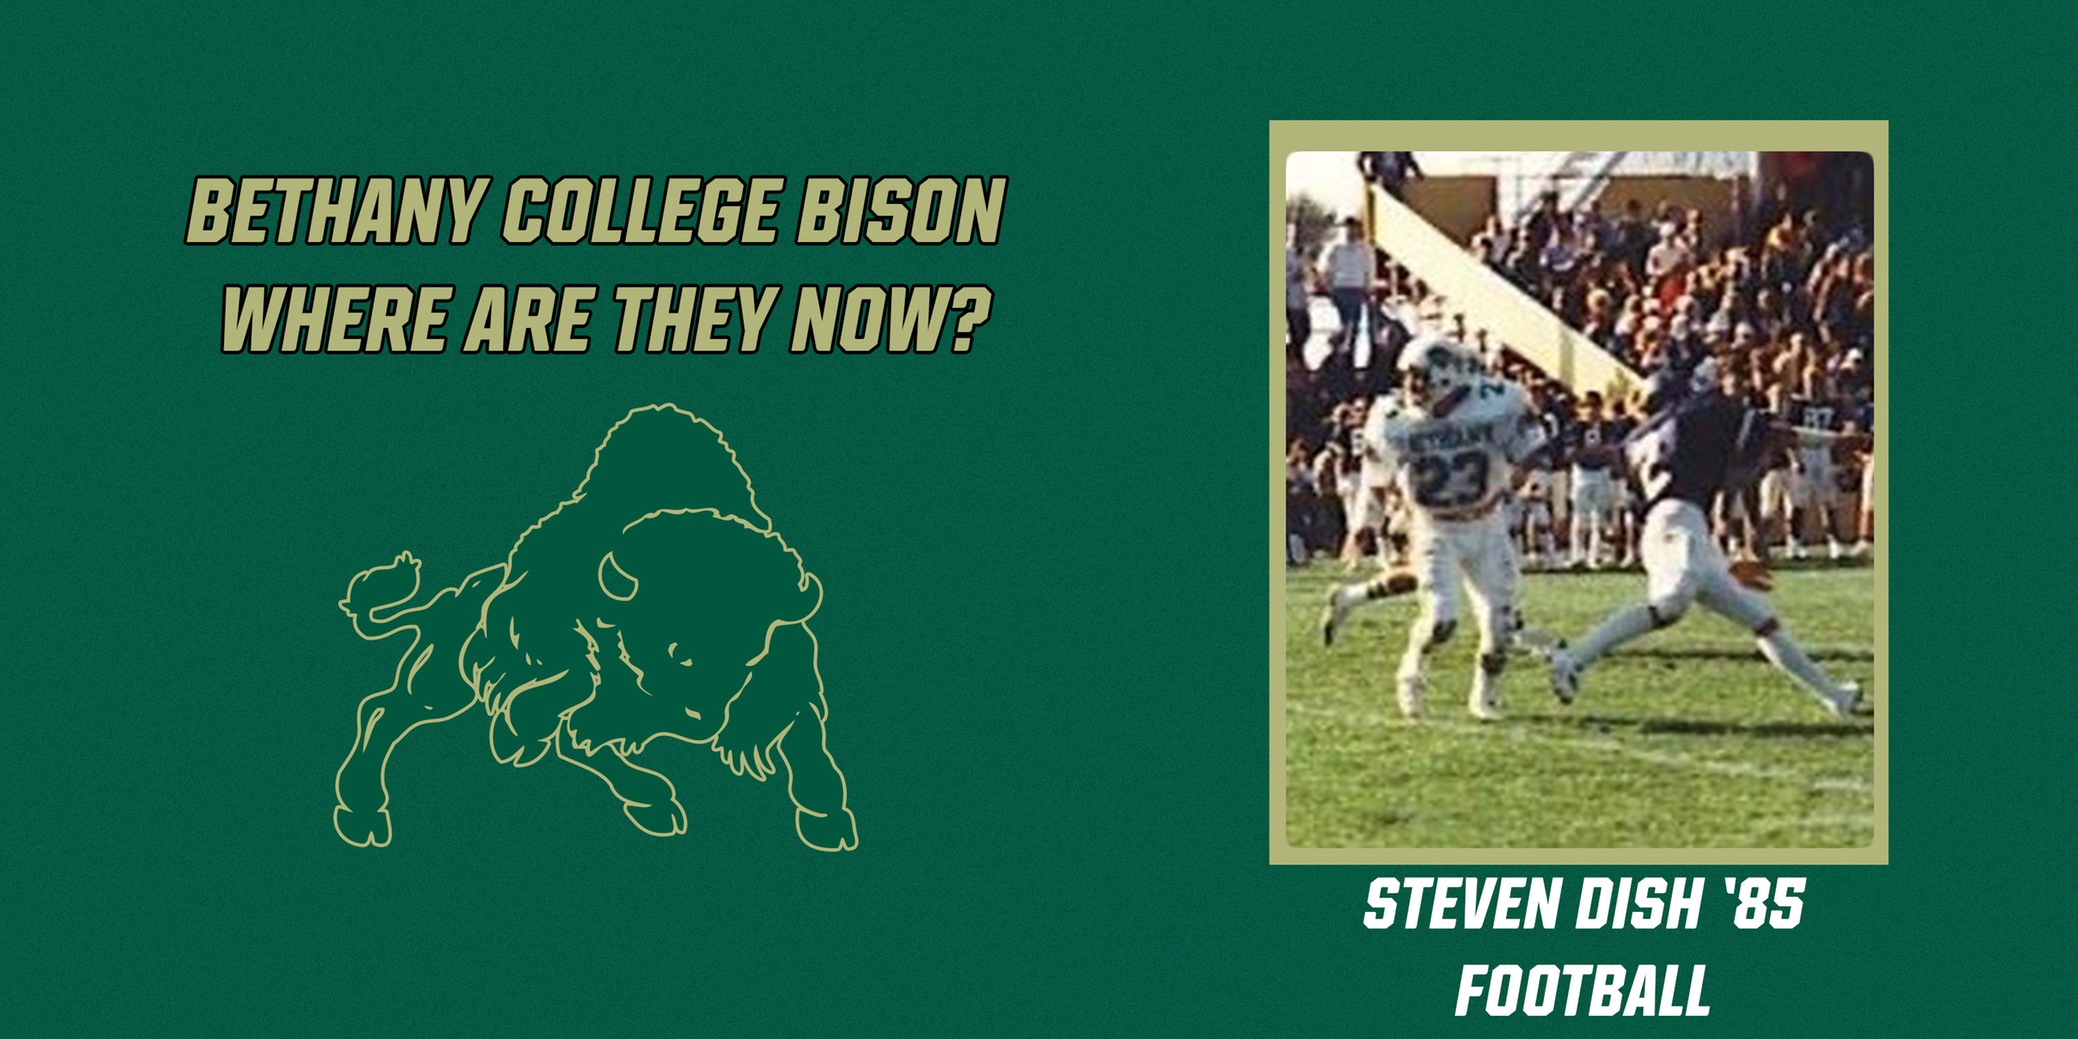 Where Are They Now Series - Steven Dish '85, Football